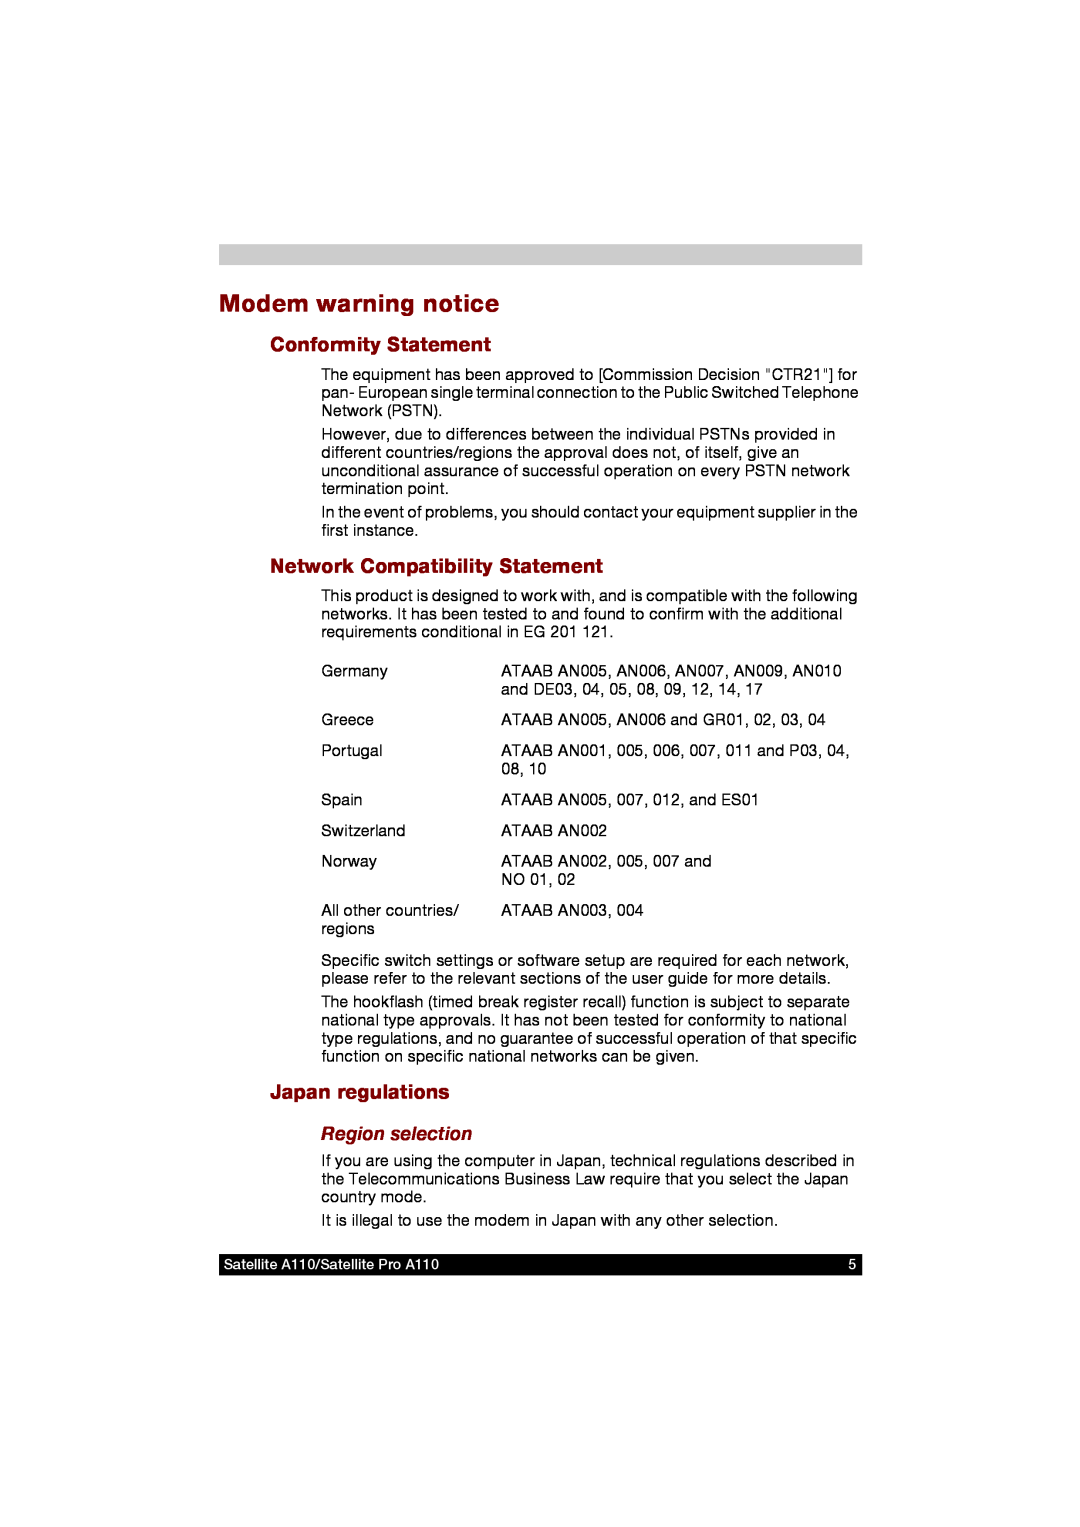 Toshiba A110 user manual Modem warning notice, Conformity Statement, Network Compatibility Statement, Japan regulations 